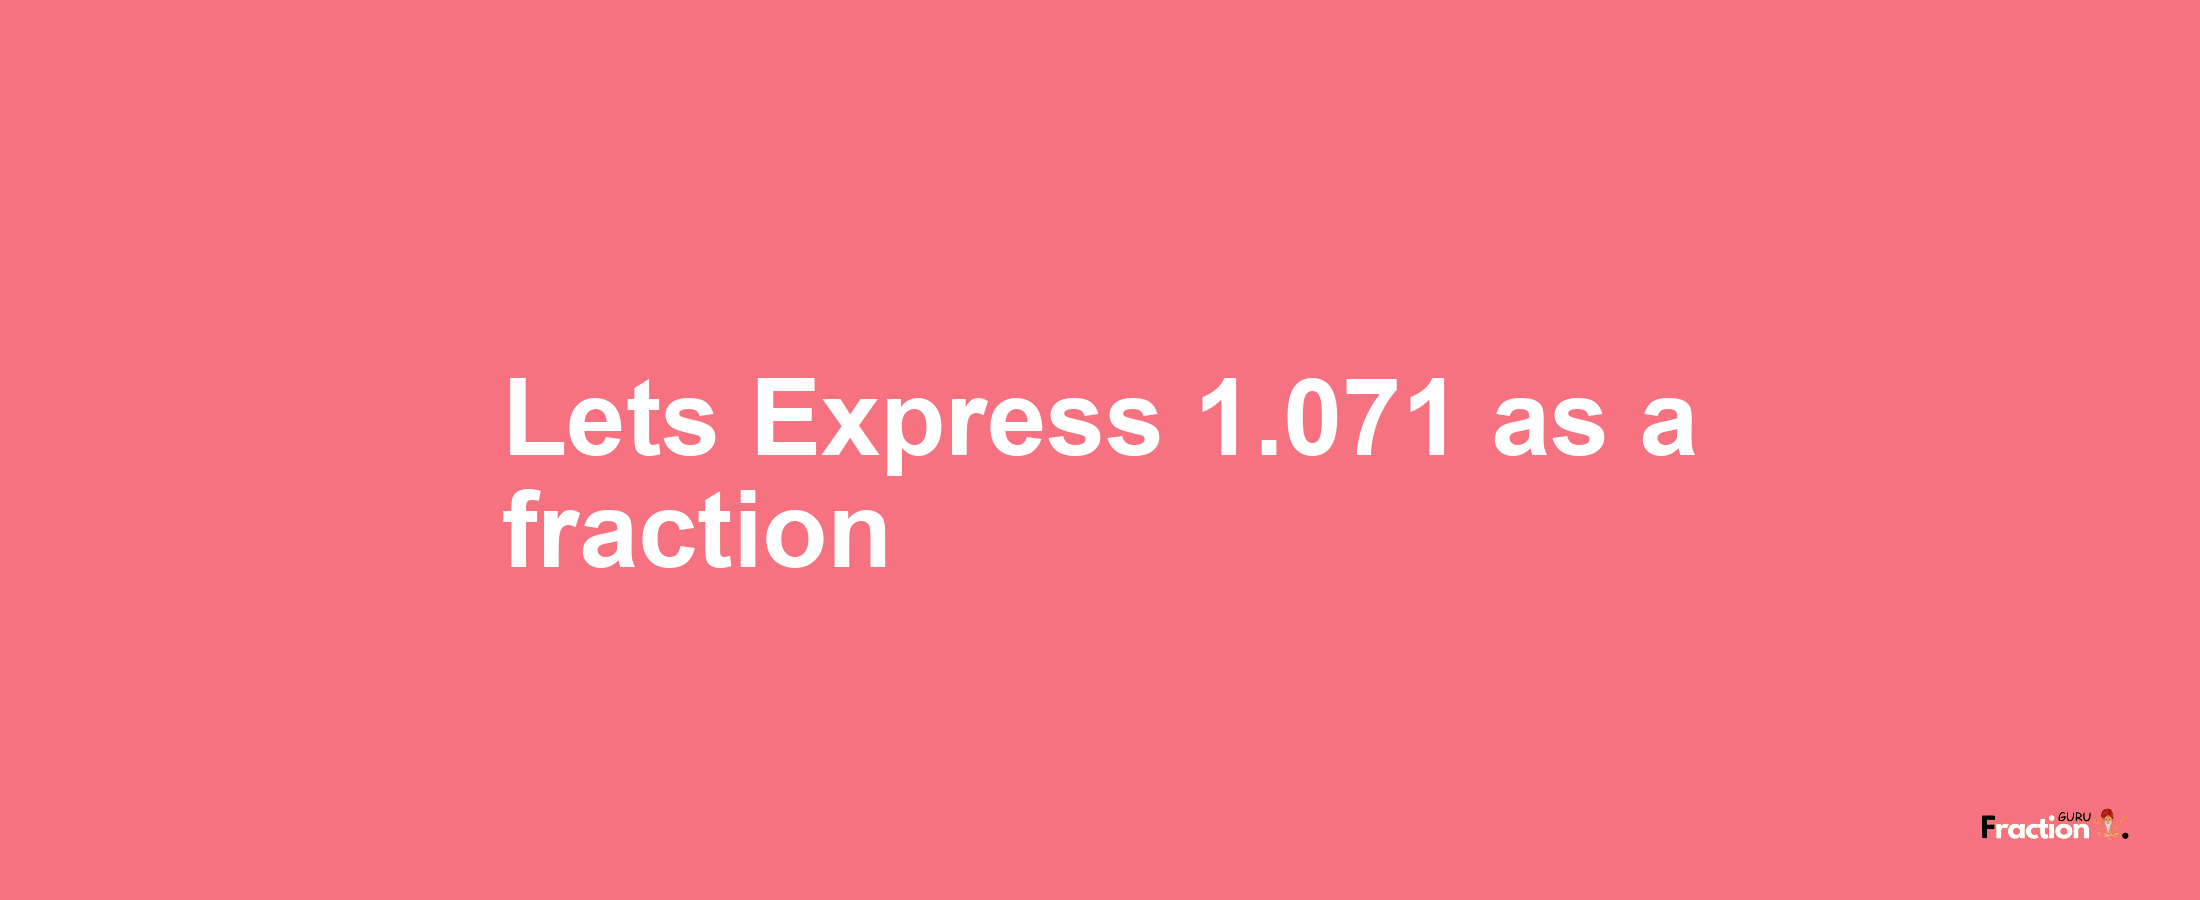 Lets Express 1.071 as afraction